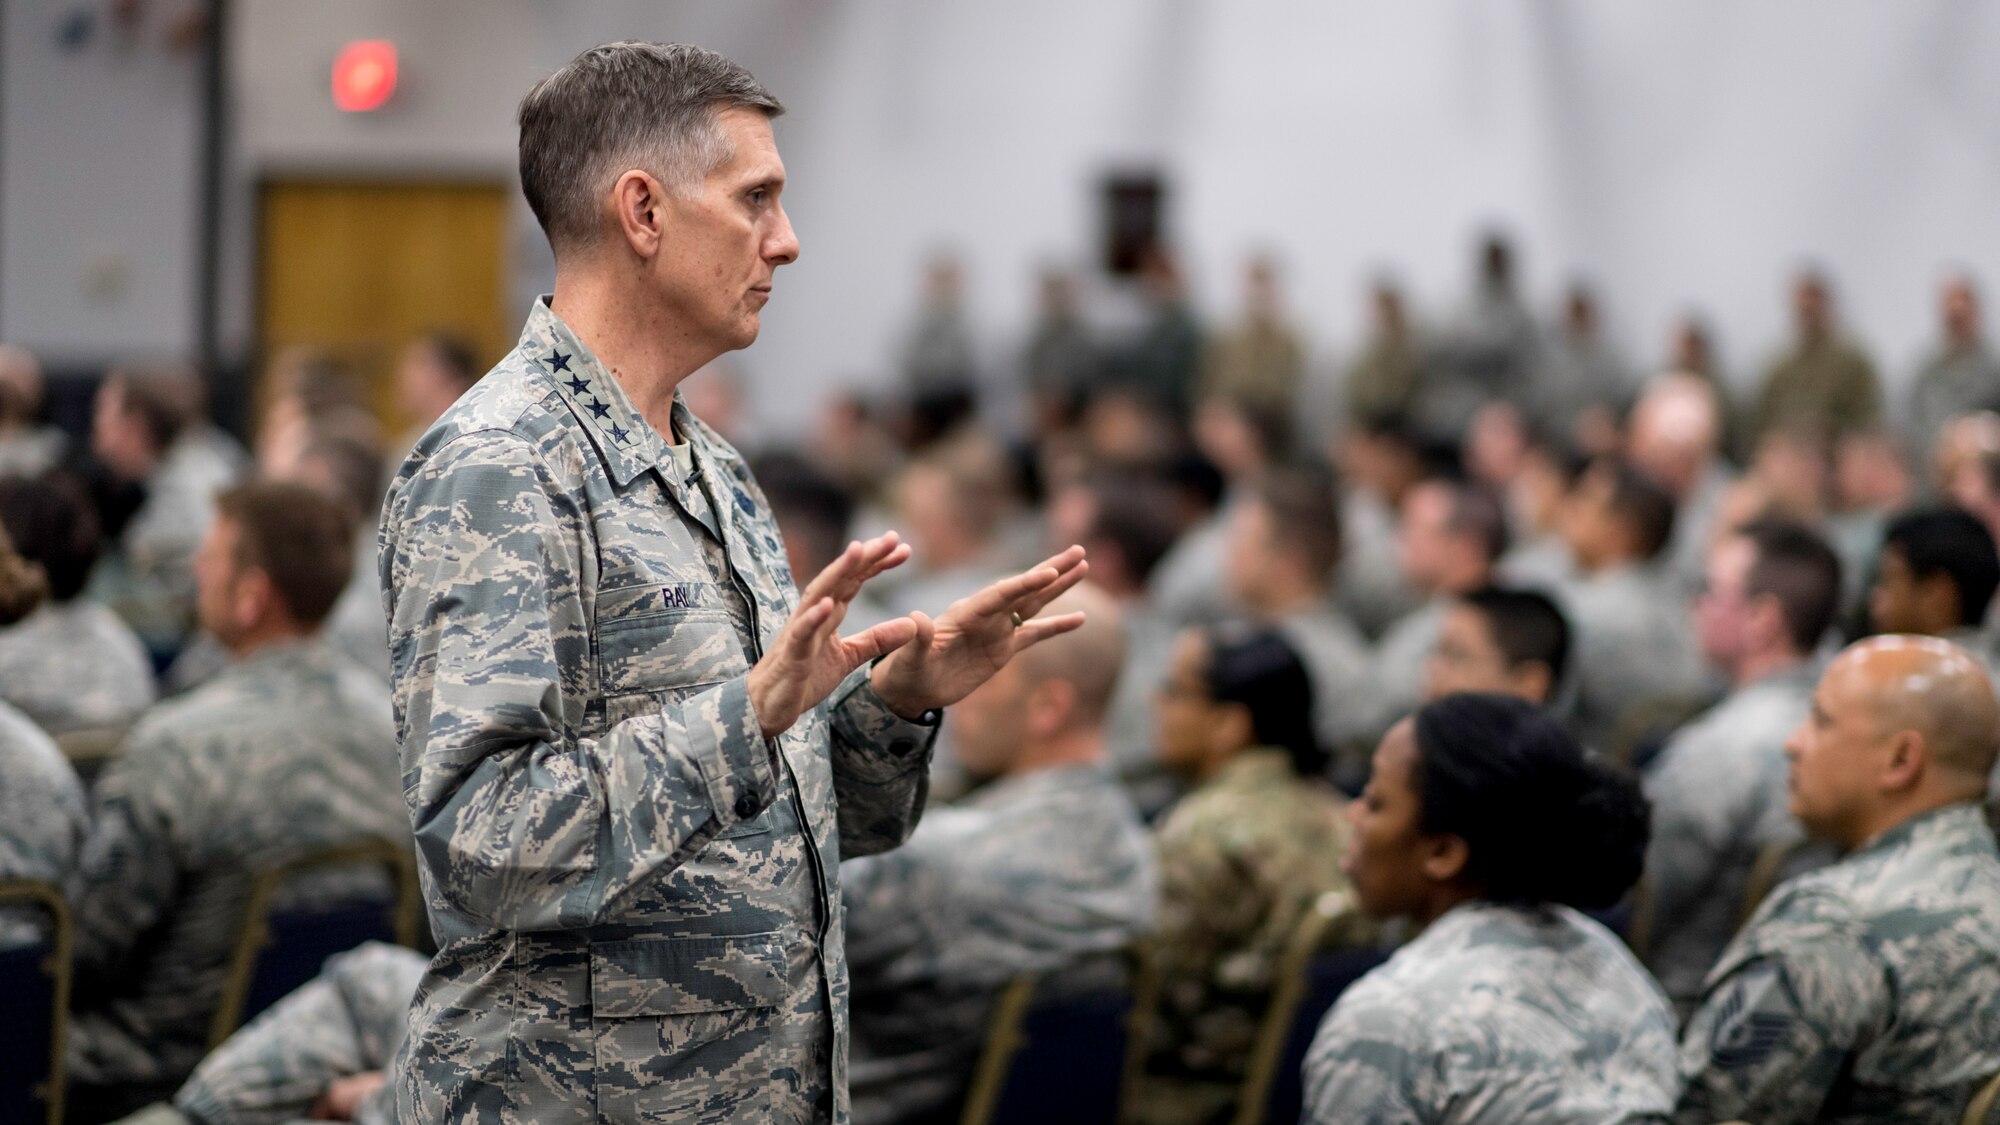 Gen. Timothy Ray, Air Force Global Strike Command commander, addresses a question posed by an Airman during a commander’s call at Barksdale Air Force Base, Louisiana, Oct. 17, 2018.  Ray spoke about the expectations for the command culture and climate. He also covered his focus areas of exhibiting excellence as professional warfighters, building integrated teams, and developing people both personally and professionally to produce trained and ready Airmen